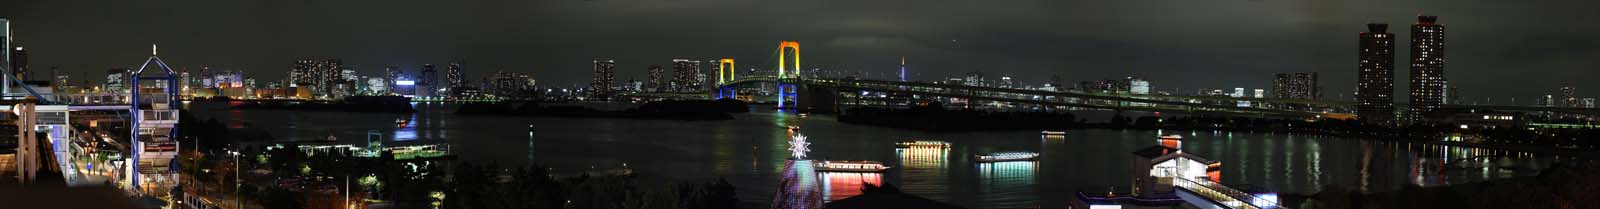 photo,material,free,landscape,picture,stock photo,Creative Commons,A night view of Odaiba, bridge, jewel, date course, seaside newly developed city center